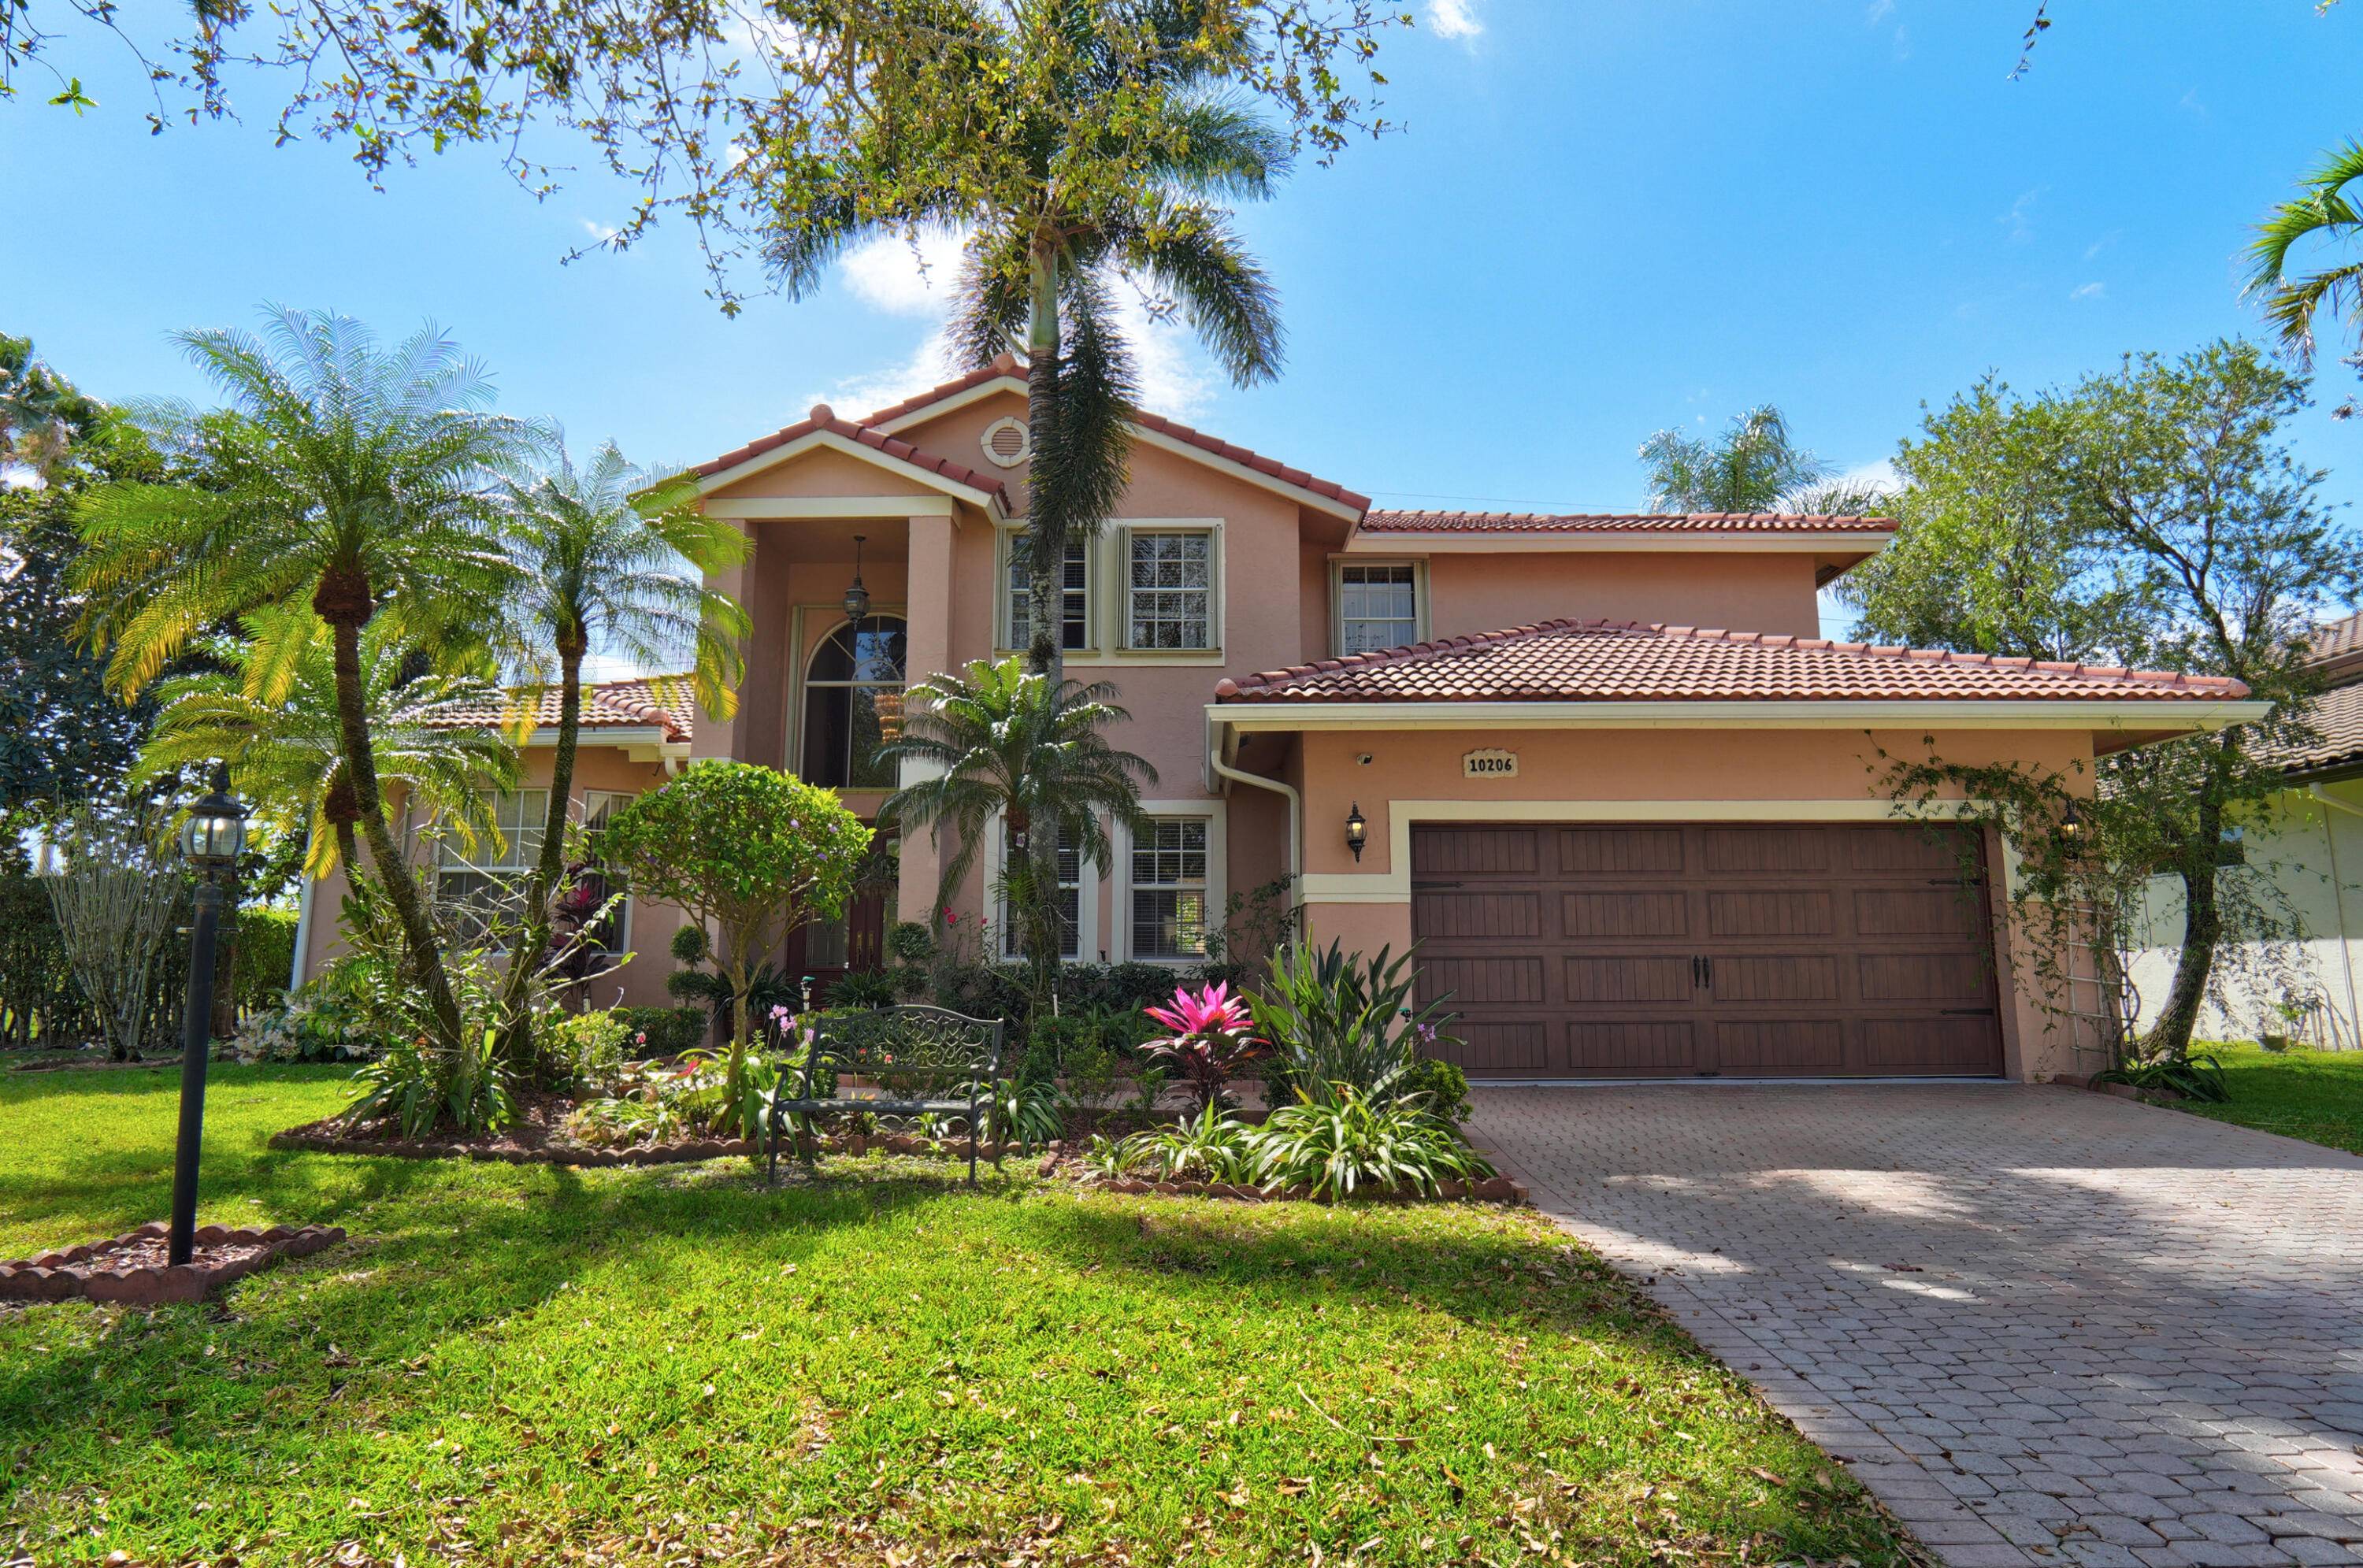 Impeccably maintained home in the highly sought after Embassy Lakes on a beautiful tree lined street.